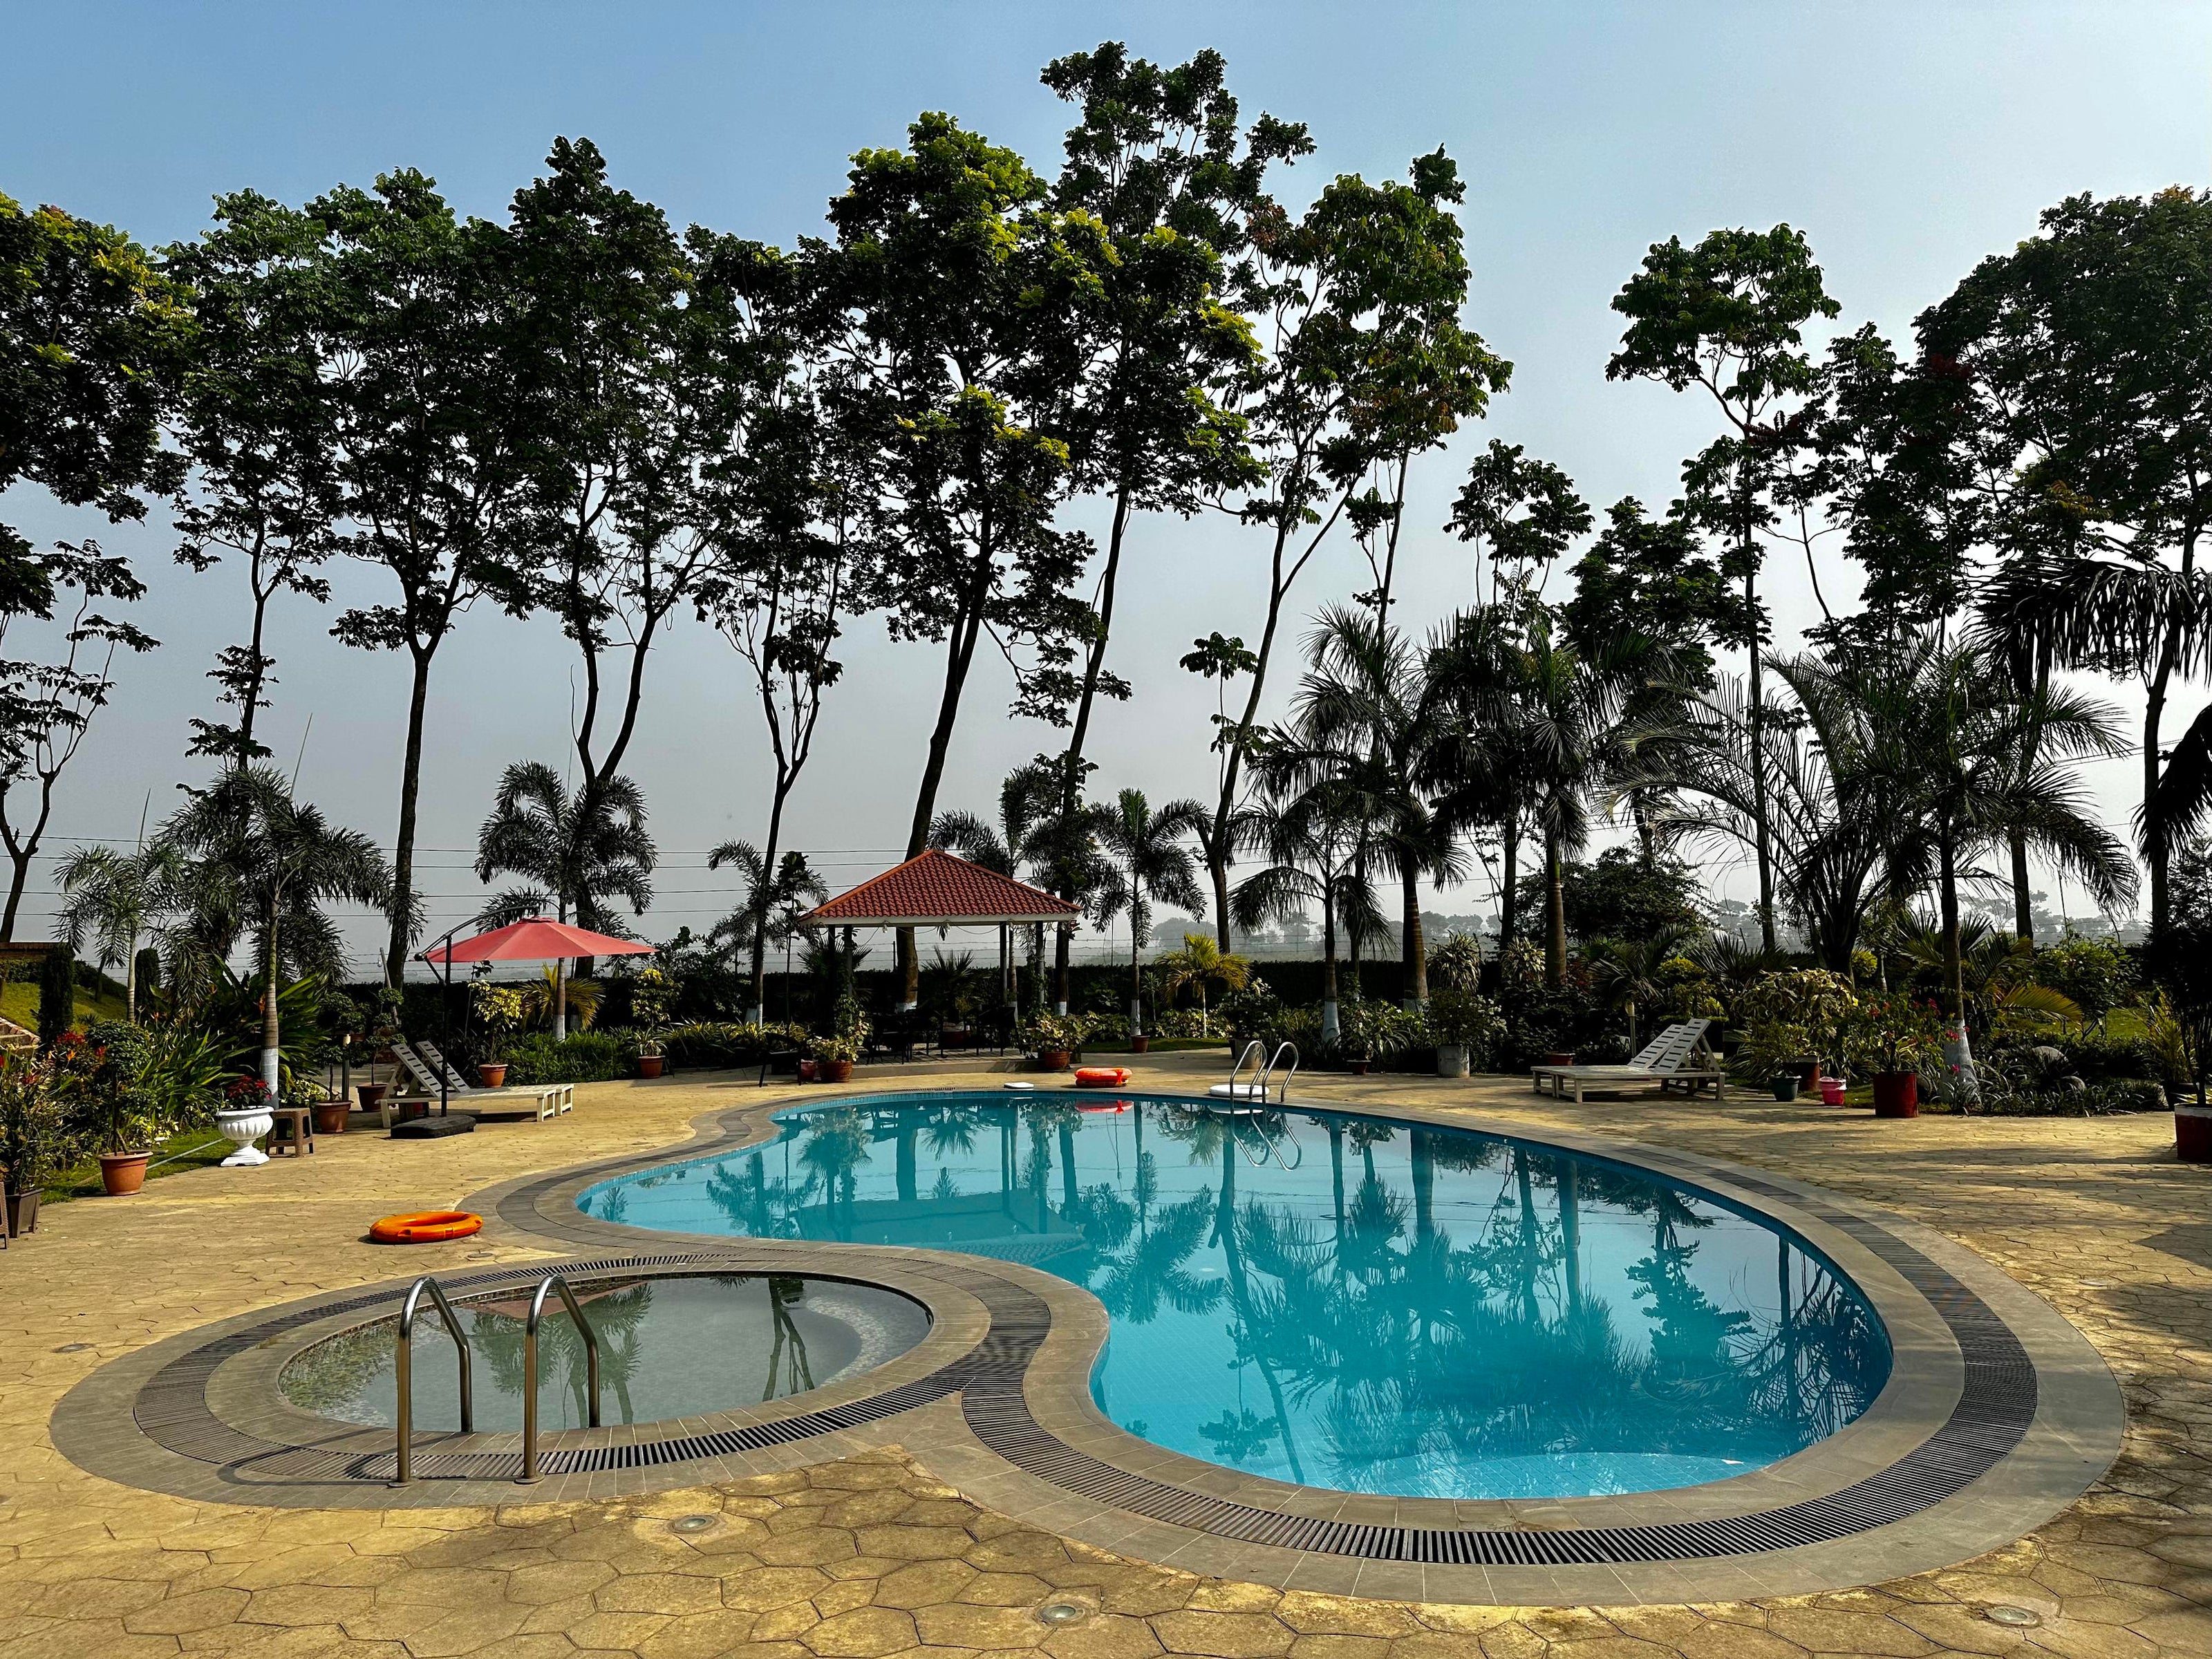 Scenic outdoor swimming pool at Barnochata, a premium Dhaka hotel and resort in Savar, framed by tall trees and clear skies.